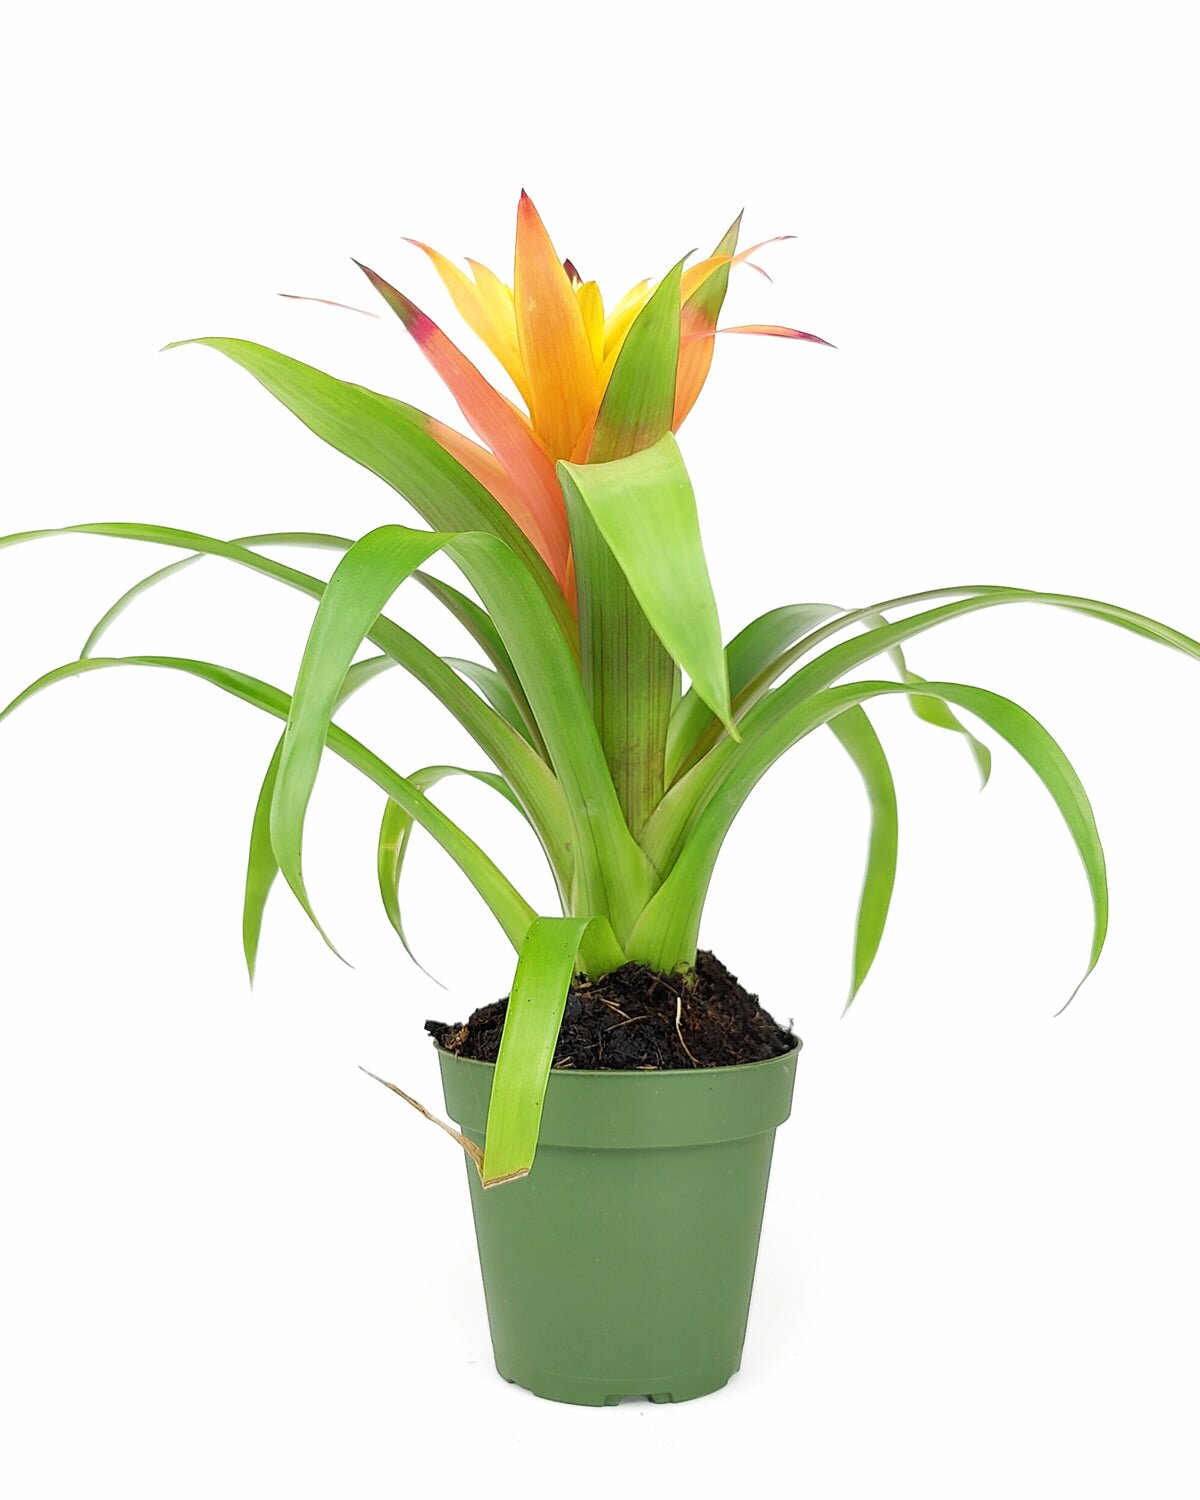 Guzmania hybrid orange plant, Guzmania Bromeliad, colorful houseplant, flowering plant for home office, low maintenance houseplant, easy to care plant for beginners